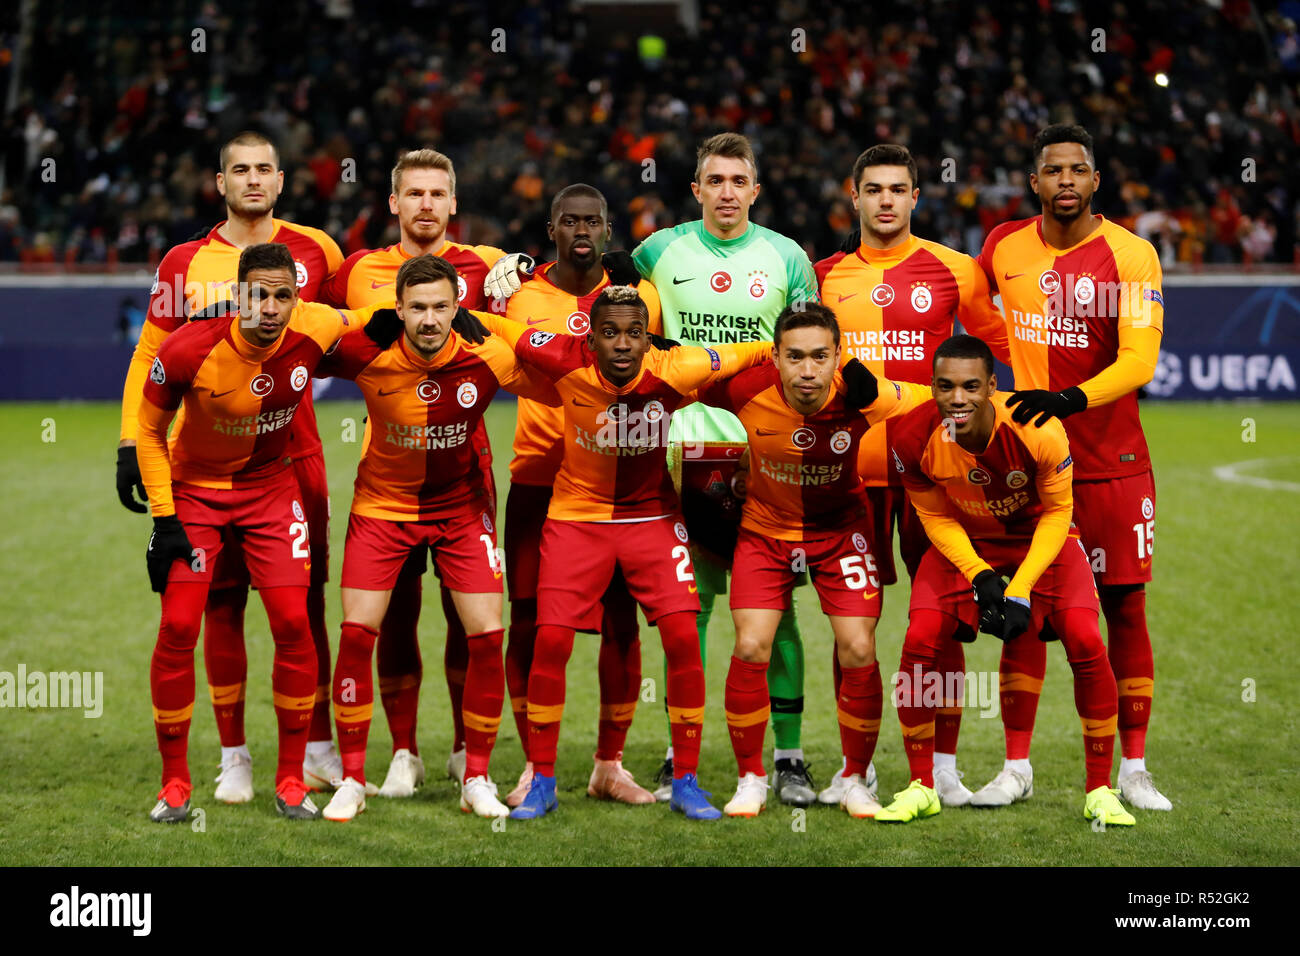 MOSCOW, RUSSIA - NOVEMBER 28: Galatasaray players pose for a photo during  the Group D match of the UEFA Champions League between FC Lokomotiv Moscow  and Galatasaray at Lokomotiv Stadium on November